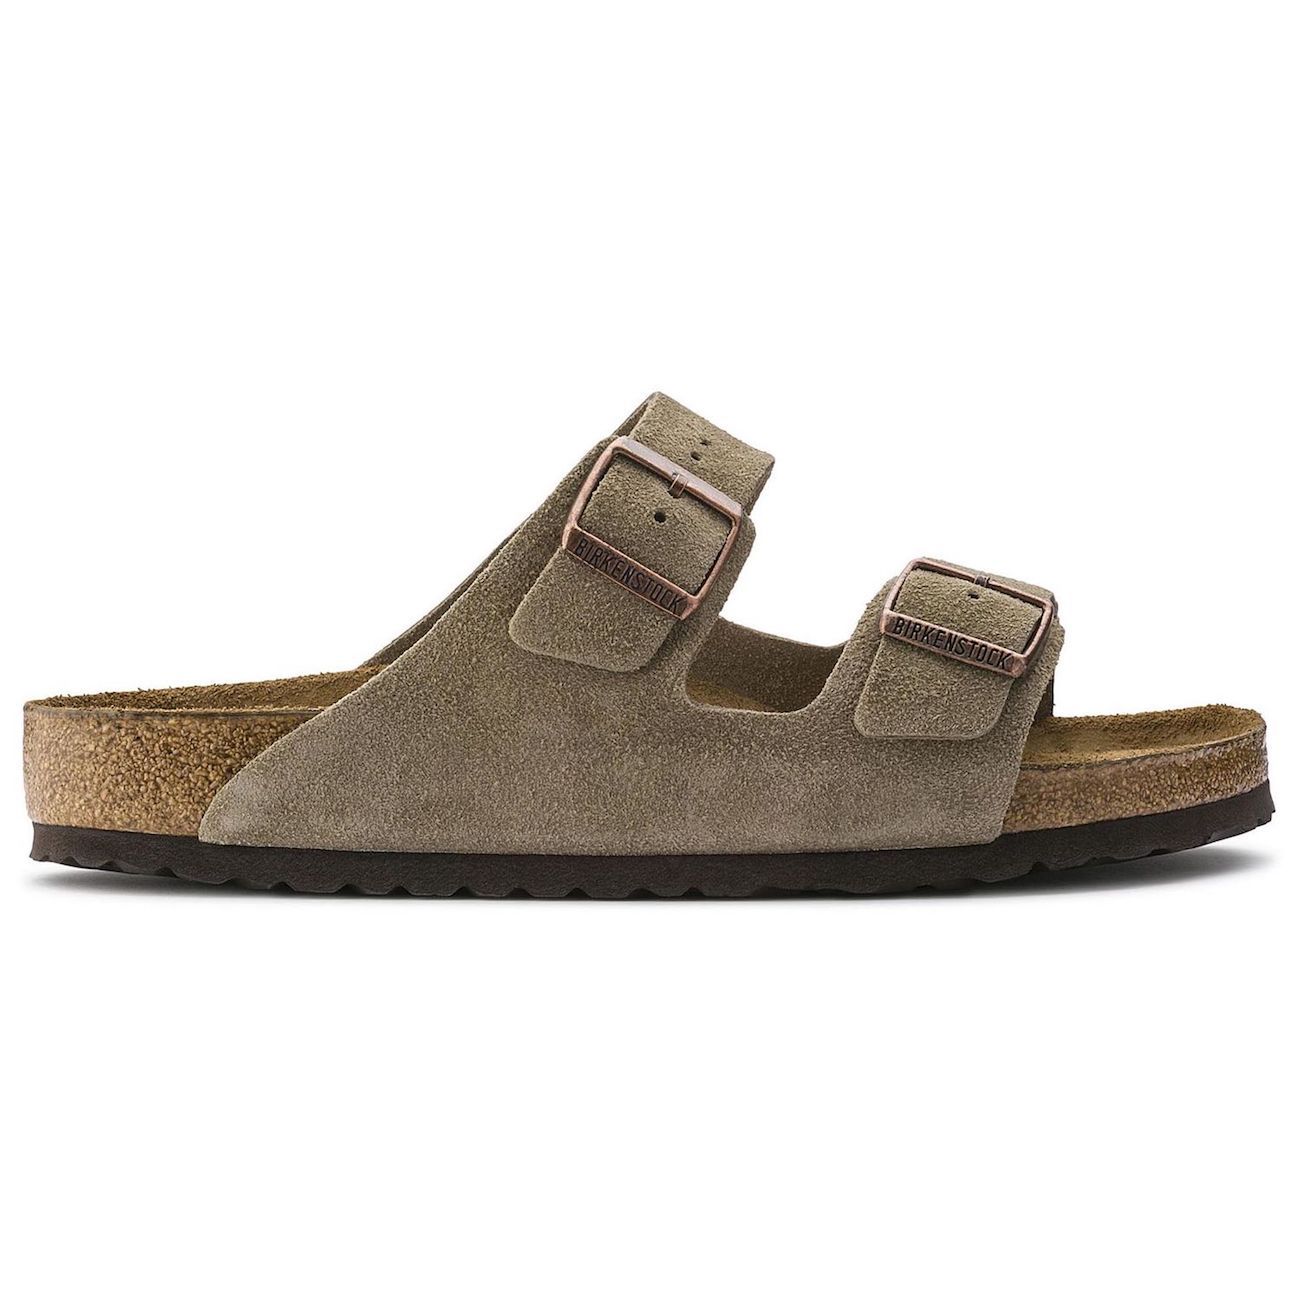 Birkenstock Classic, Arizona, Soft-Footbed, Suede Leather, Regular Fit, Taupe Sandals Birkenstock Classic Taupe 36 